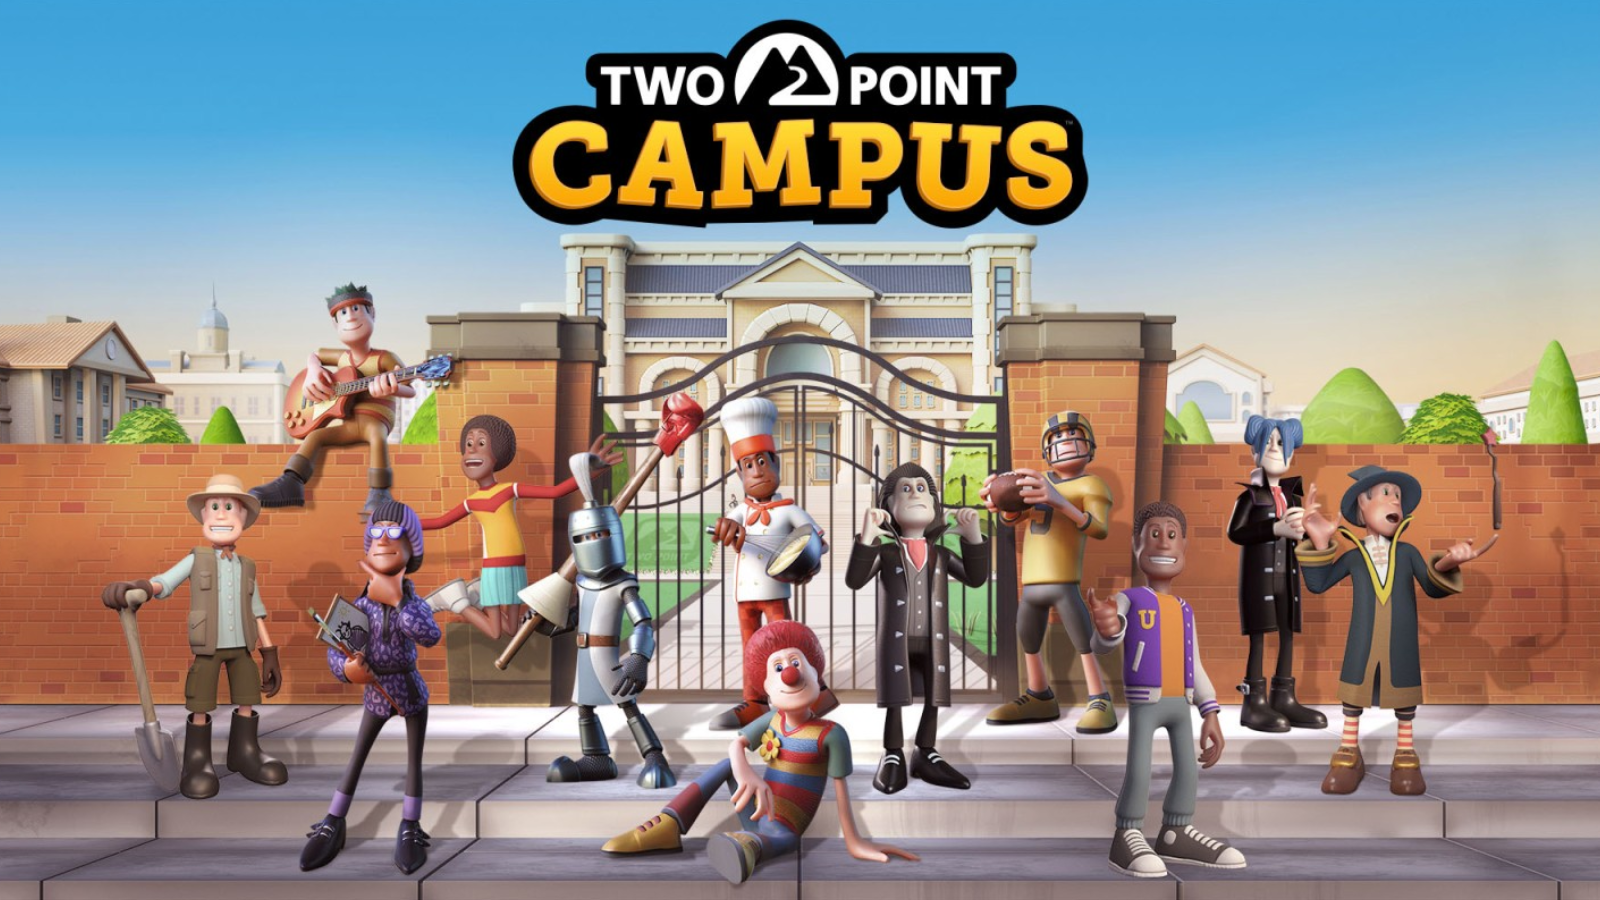 Two-point campus